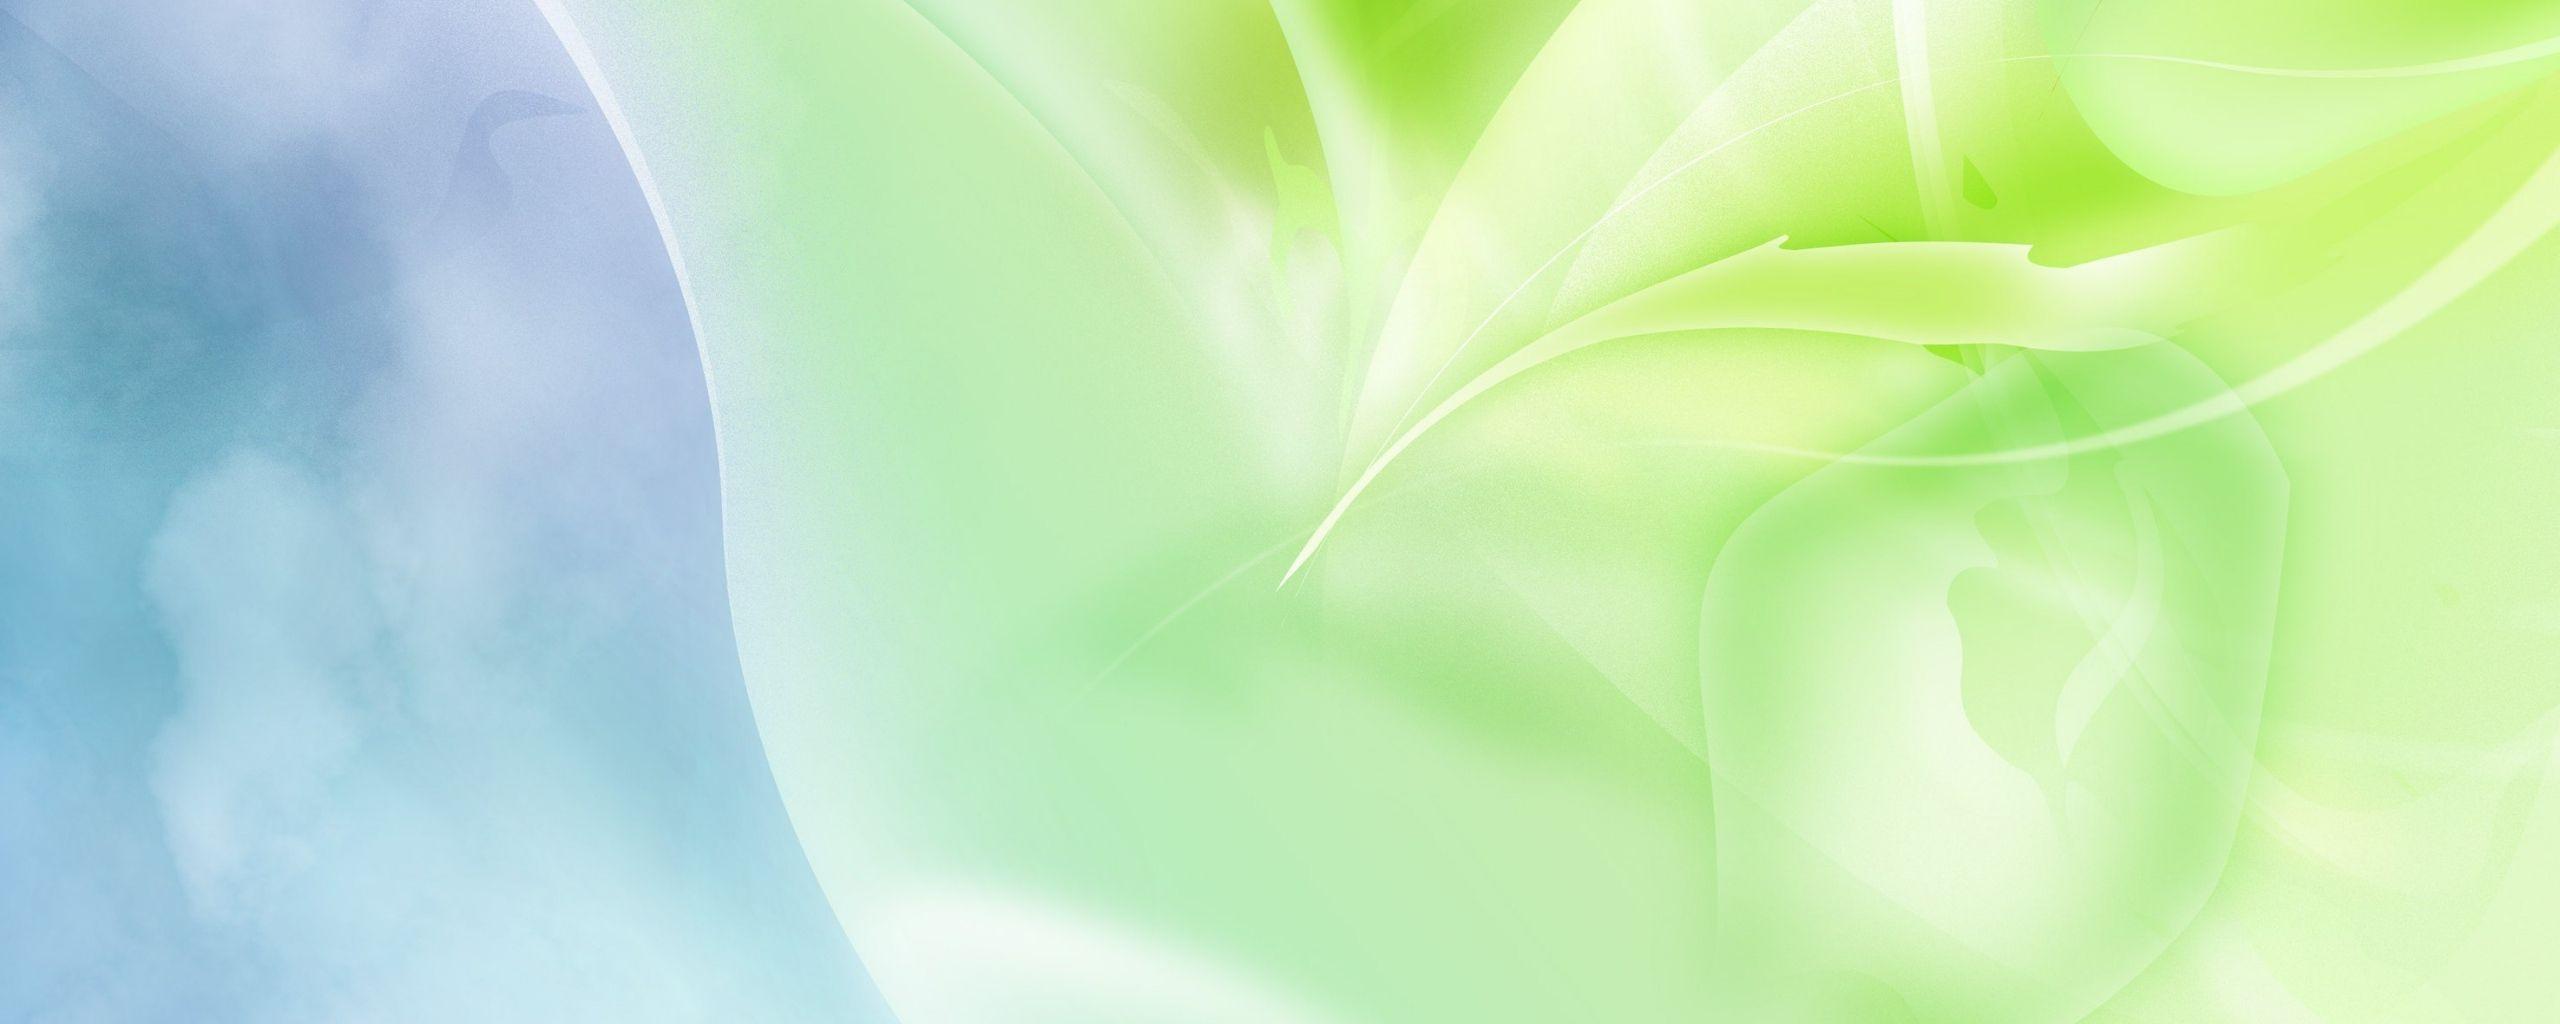 Green And White Background Free Download